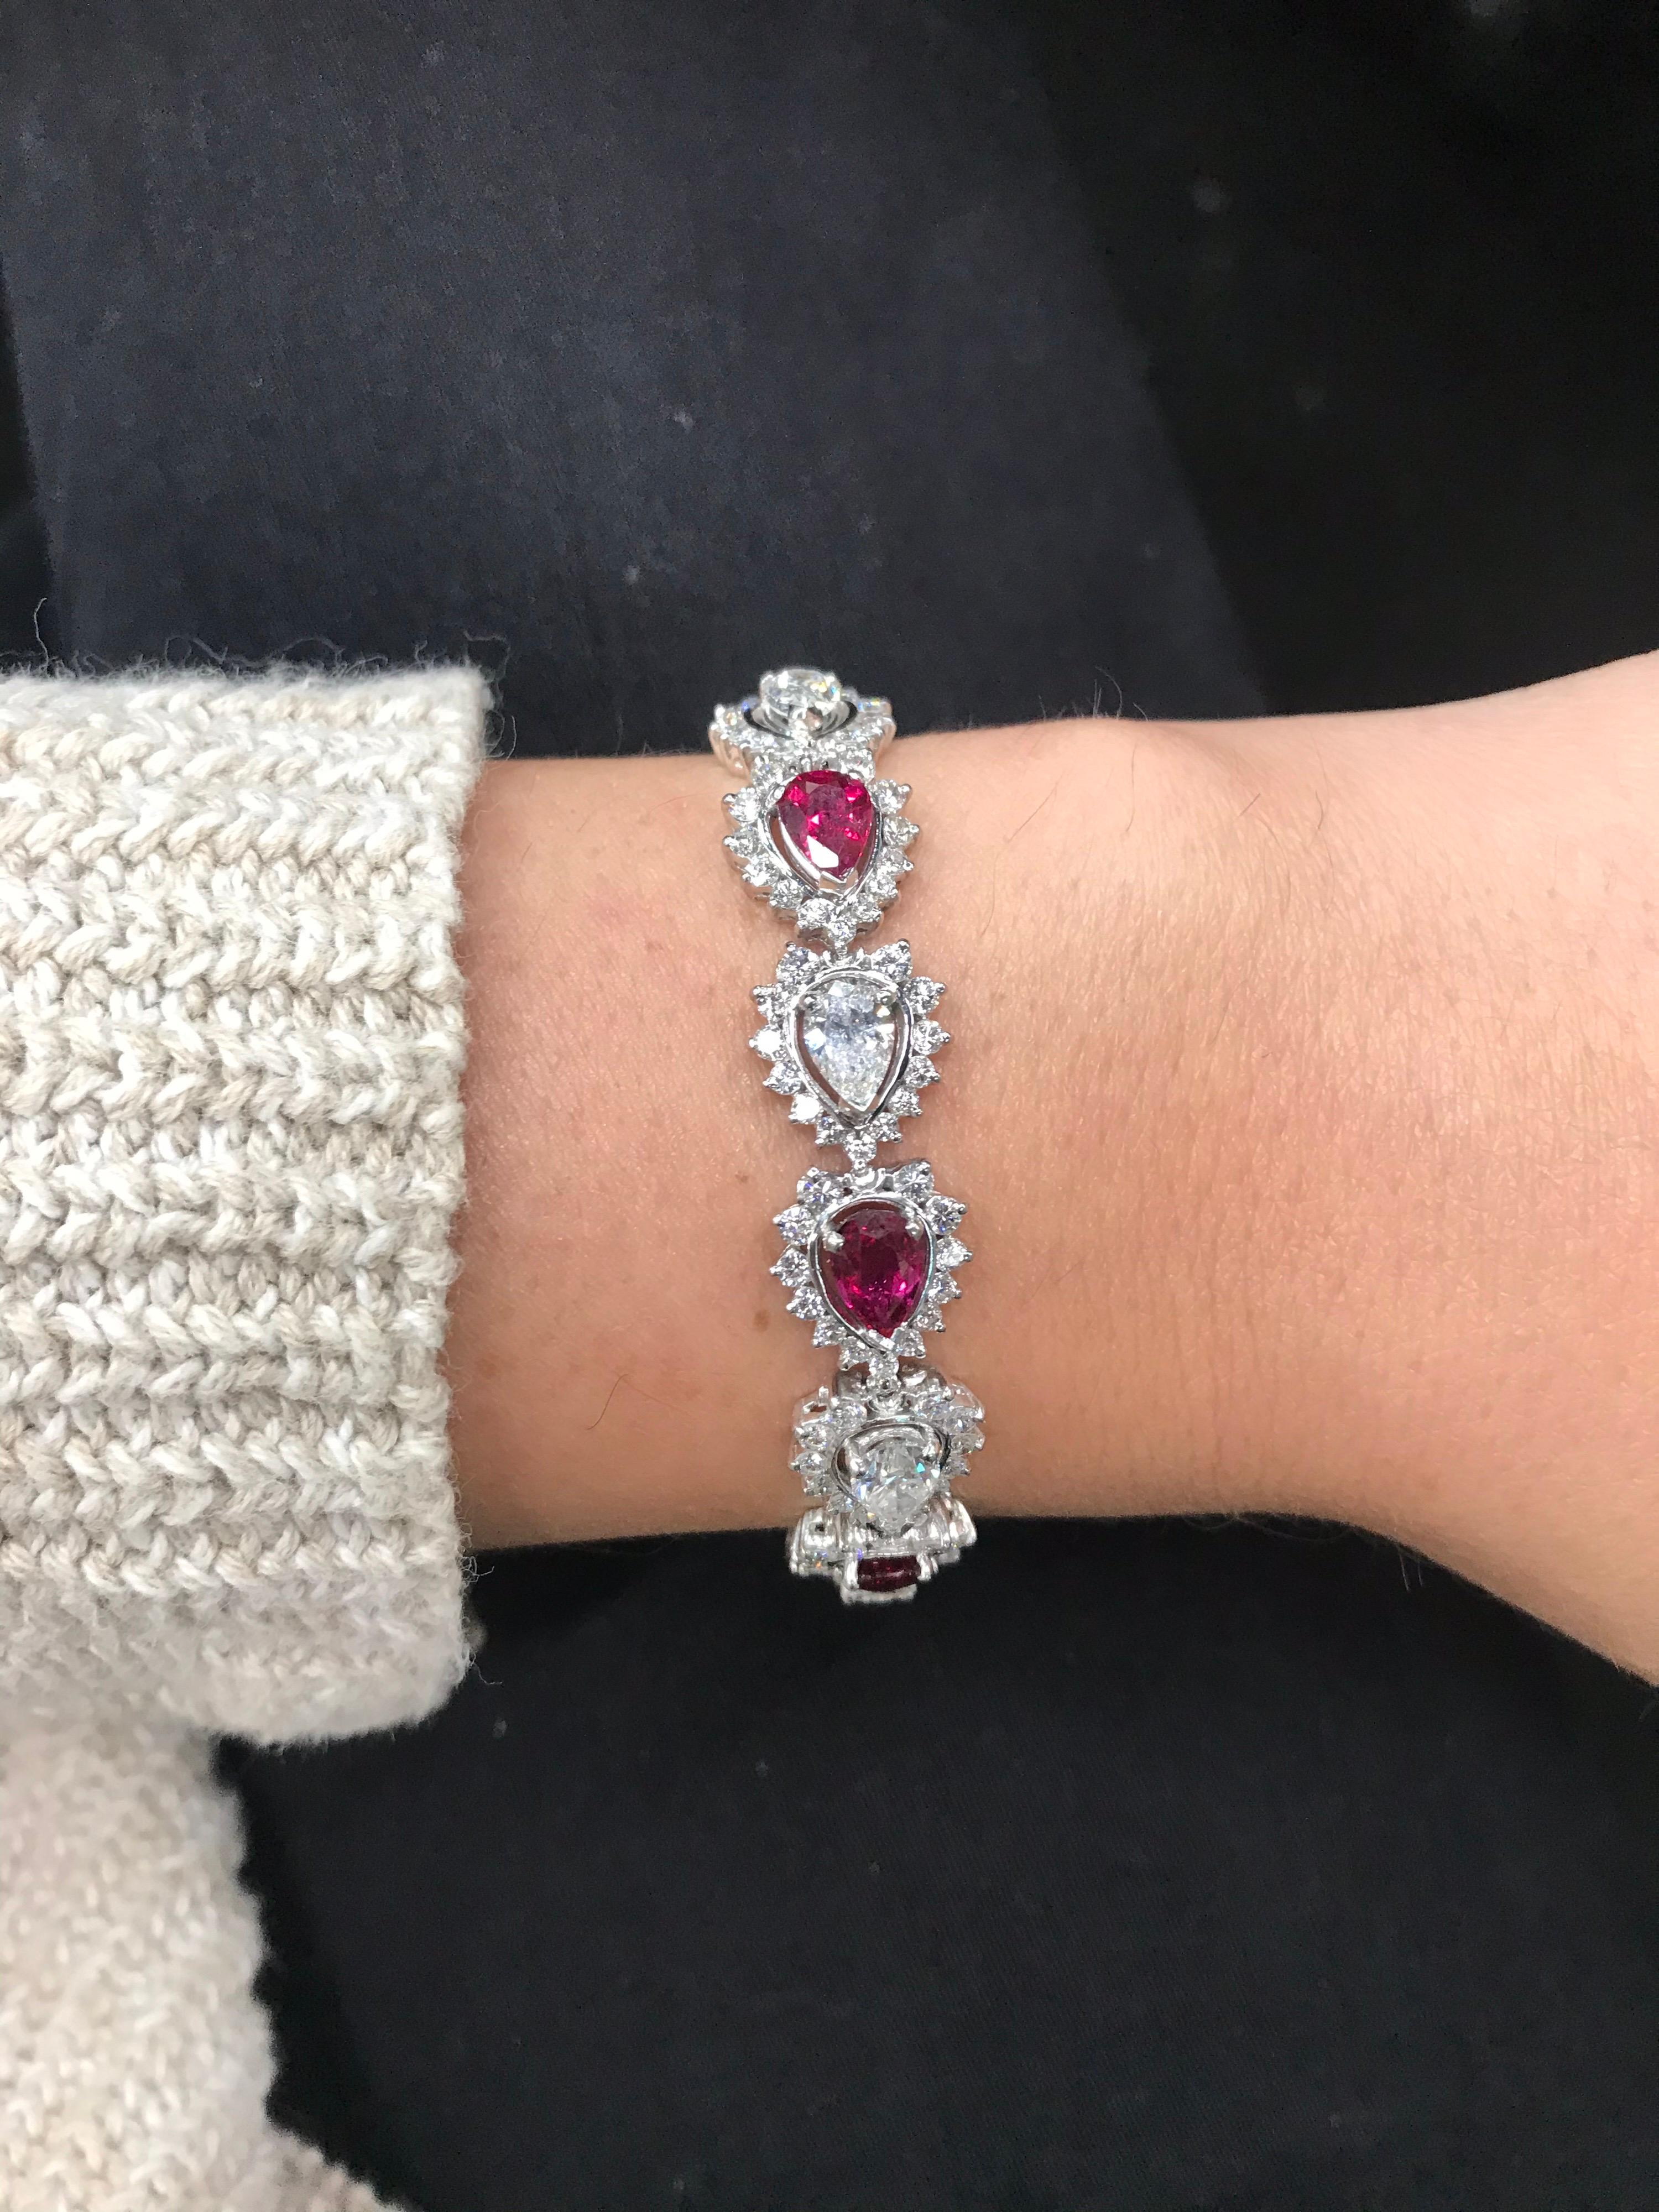 This bracelet features seven alternating pear shape diamond and rubies and each one is flanked with a diamond halo, crafted in platinum.
Rubies: Approximately 6 Carats
Diamonds: Approximately 11.50 Carats

Color: G-H
Clarity: SI